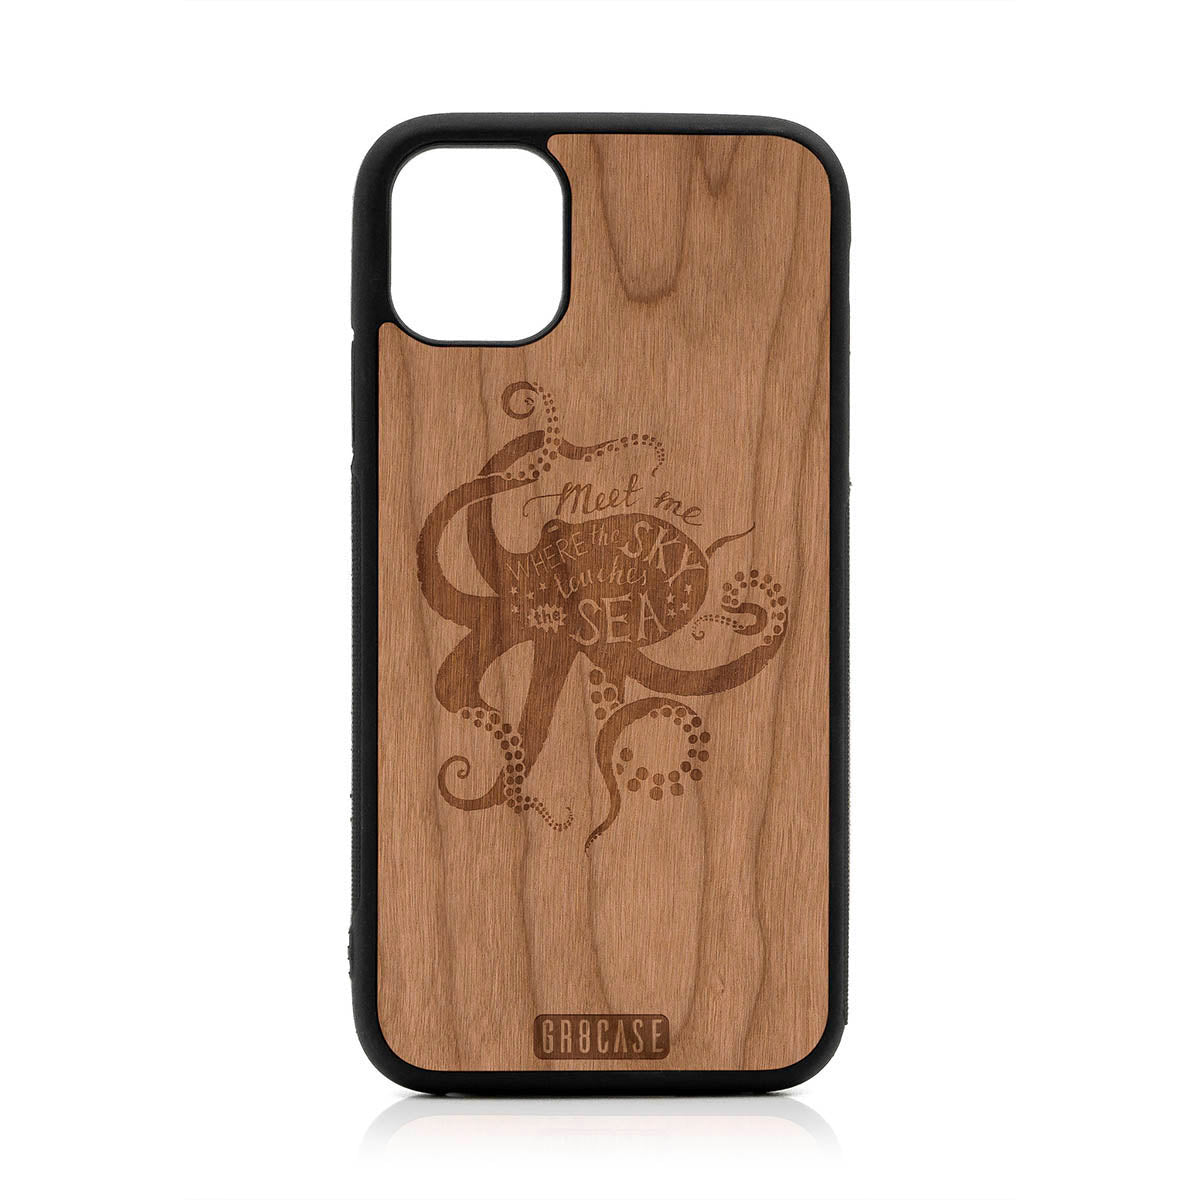 Meet Me Where The Sky Touches The Sea (Octopus) Design Wood Case For iPhone 11